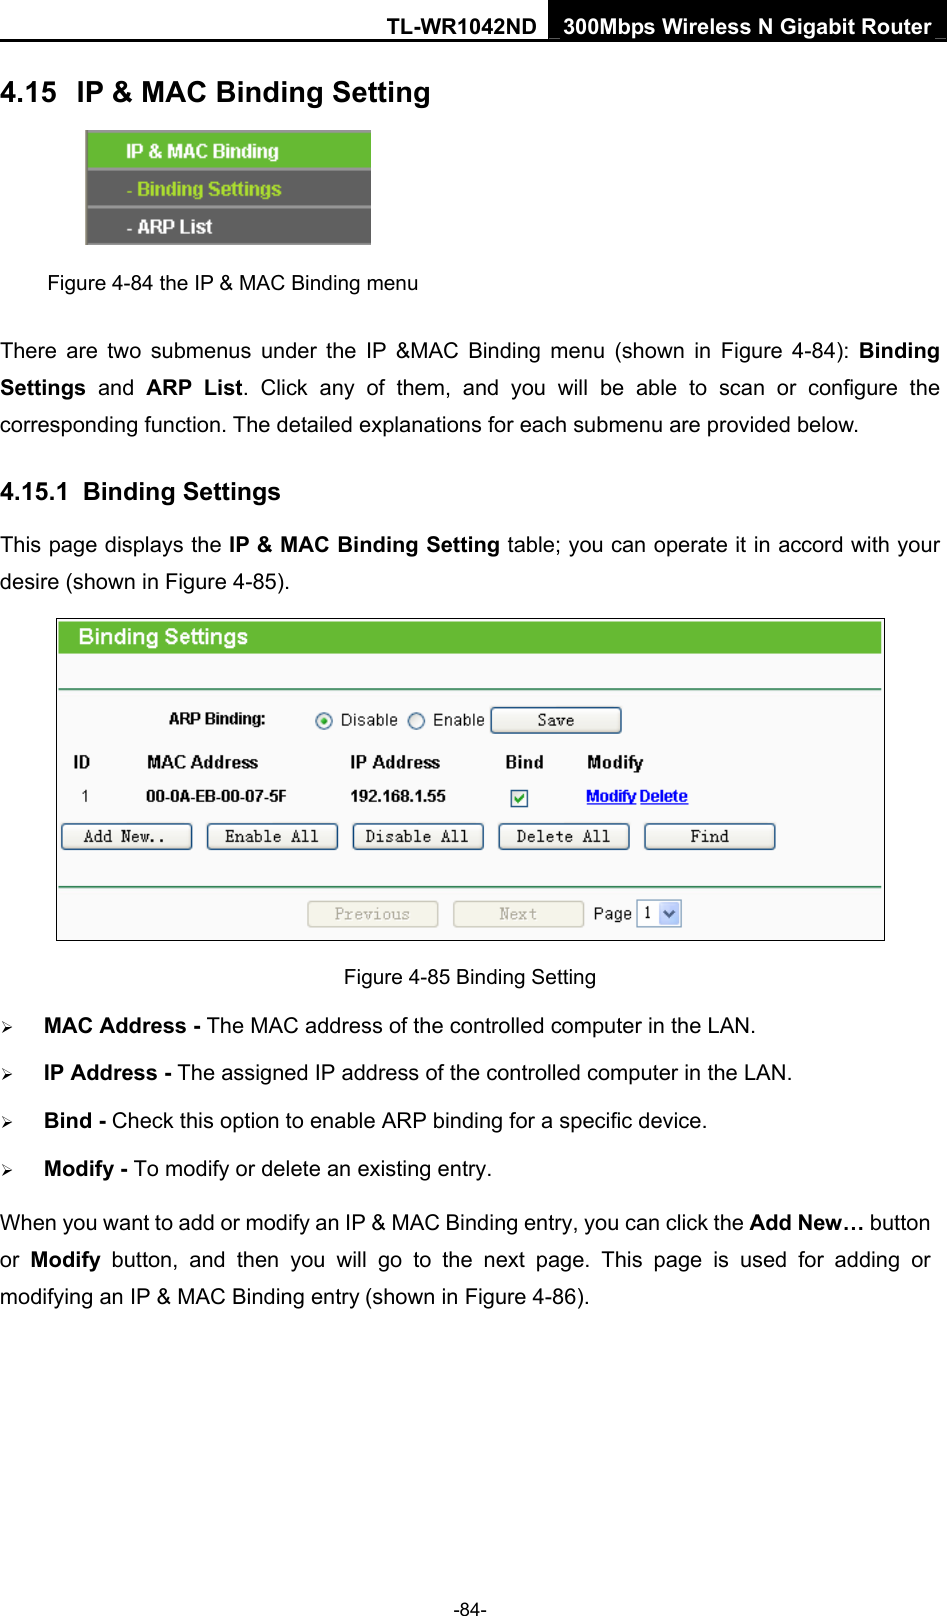 TL-WR1042ND 300Mbps Wireless N Gigabit Router -84- 4.15  IP &amp; MAC Binding Setting  Figure 4-84 the IP &amp; MAC Binding menu There are two submenus under the IP &amp;MAC Binding menu (shown in Figure 4-84): Binding Settings  and ARP List. Click any of them, and you will be able to scan or configure the corresponding function. The detailed explanations for each submenu are provided below. 4.15.1  Binding Settings This page displays the IP &amp; MAC Binding Setting table; you can operate it in accord with your desire (shown in Figure 4-85).    Figure 4-85 Binding Setting ¾ MAC Address - The MAC address of the controlled computer in the LAN.   ¾ IP Address - The assigned IP address of the controlled computer in the LAN.   ¾ Bind - Check this option to enable ARP binding for a specific device.   ¾ Modify - To modify or delete an existing entry.   When you want to add or modify an IP &amp; MAC Binding entry, you can click the Add New… button or  Modify button, and then you will go to the next page. This page is used for adding or modifying an IP &amp; MAC Binding entry (shown in Figure 4-86).   